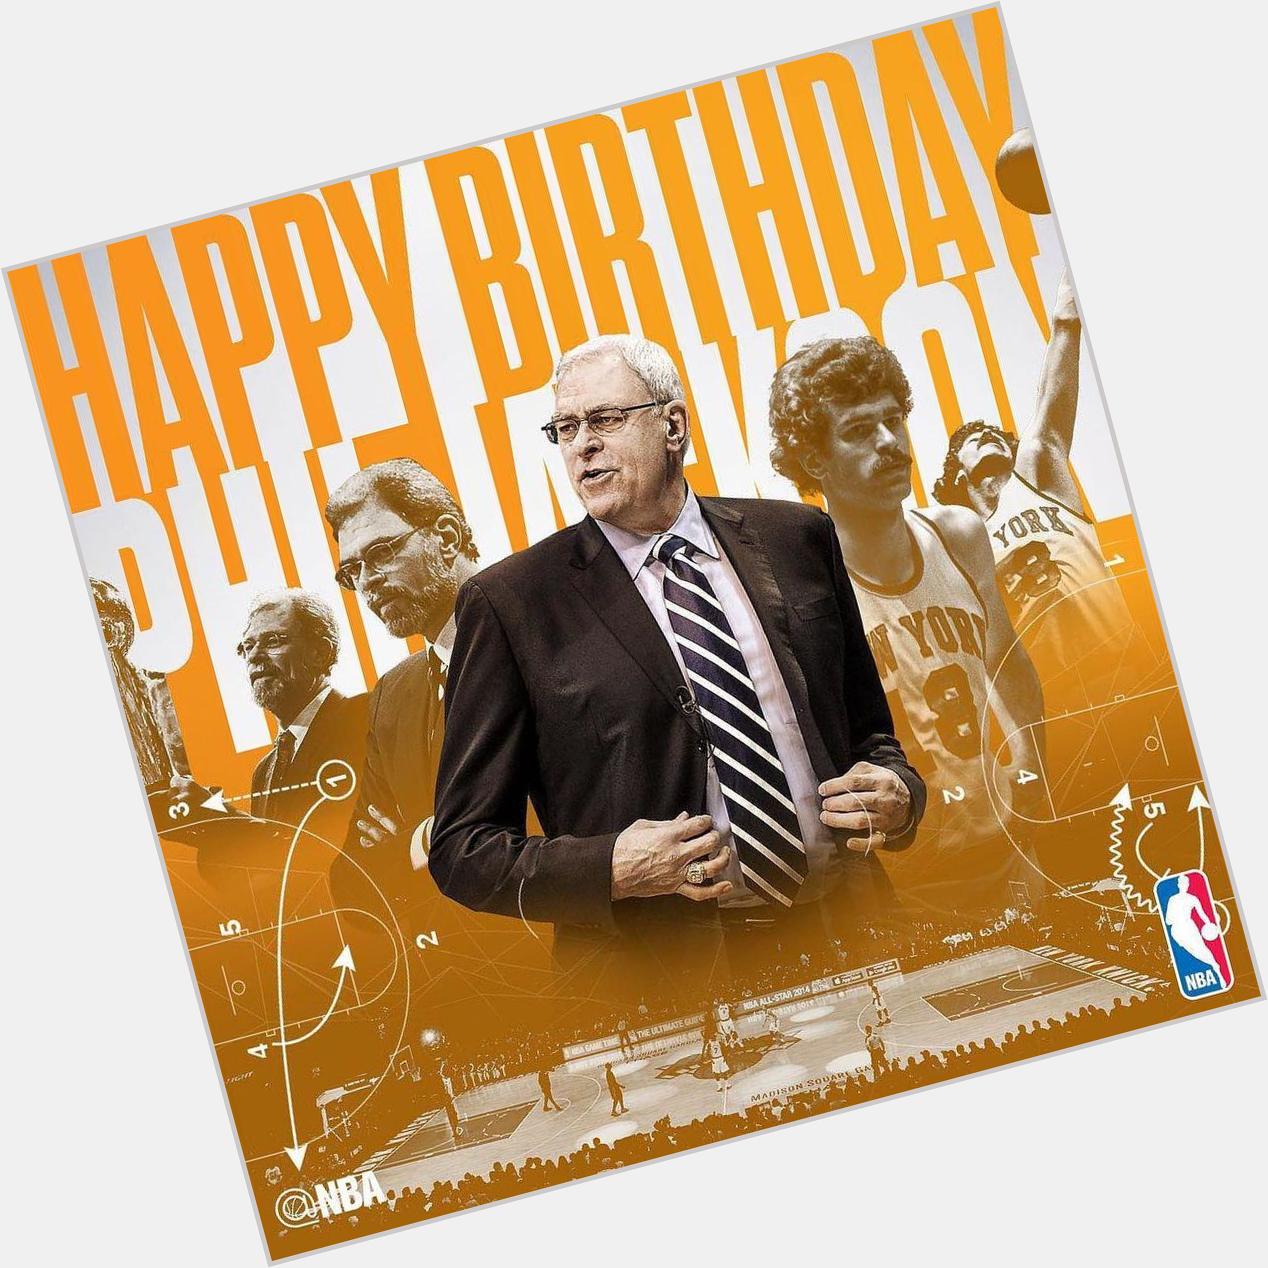  Join us in wishing 13x champ PHIL JACKSON a HAPPY 70th BIRTHDAY! by 